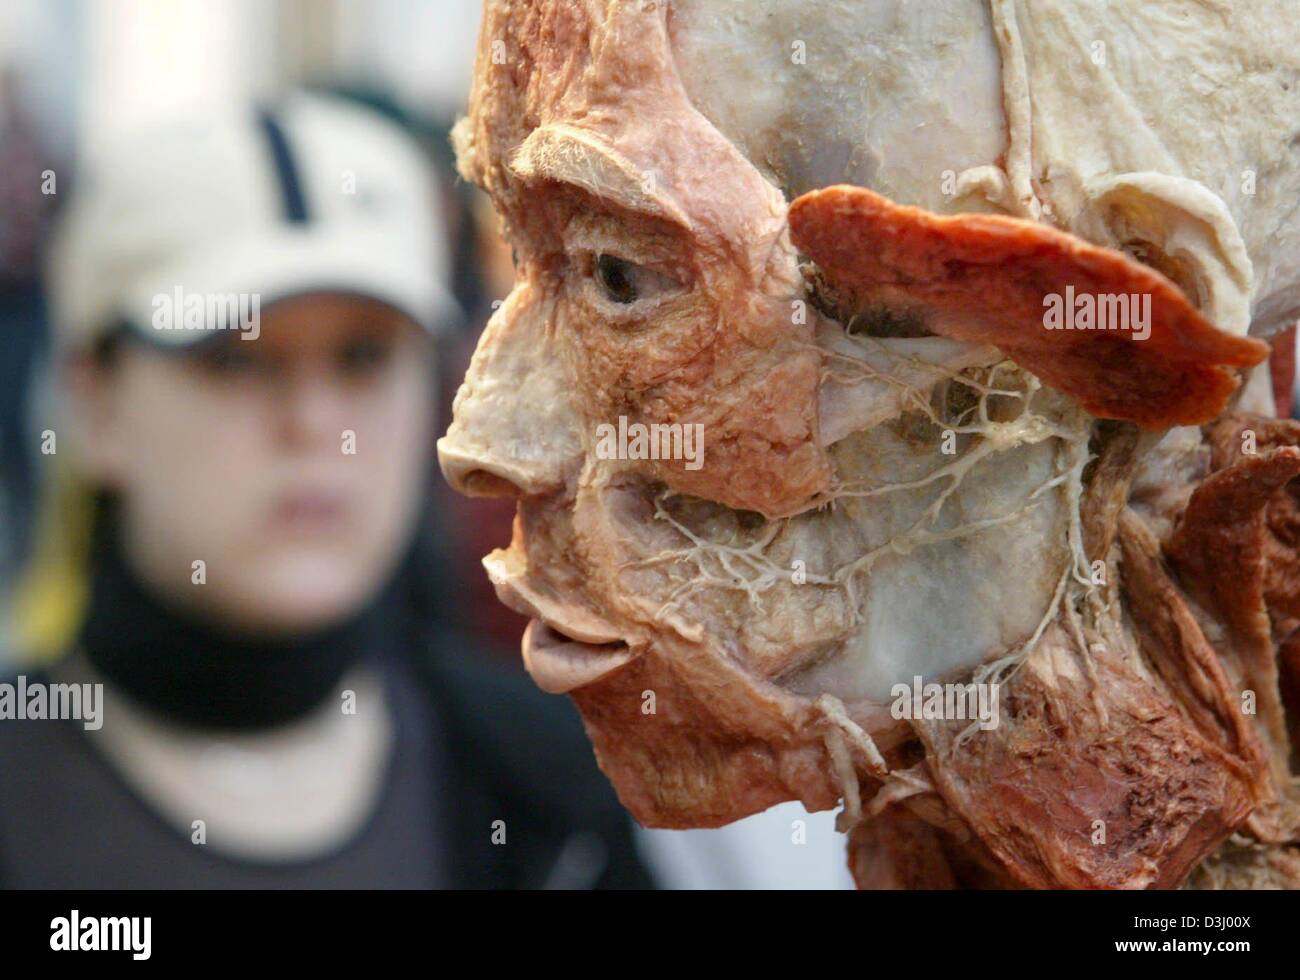 (dpa) - A visitor (L) examines a plastinated head at the Body World exhibition in Frankfurt Main, Germany, 22 January 2004. The German news magazine 'Der Spiegel' accused von Hagens of irregularities concerning his exhibition Body Worlds. von Hagens and his employees allegedly purchased and dissected the corpses of people who where executed. Stock Photo